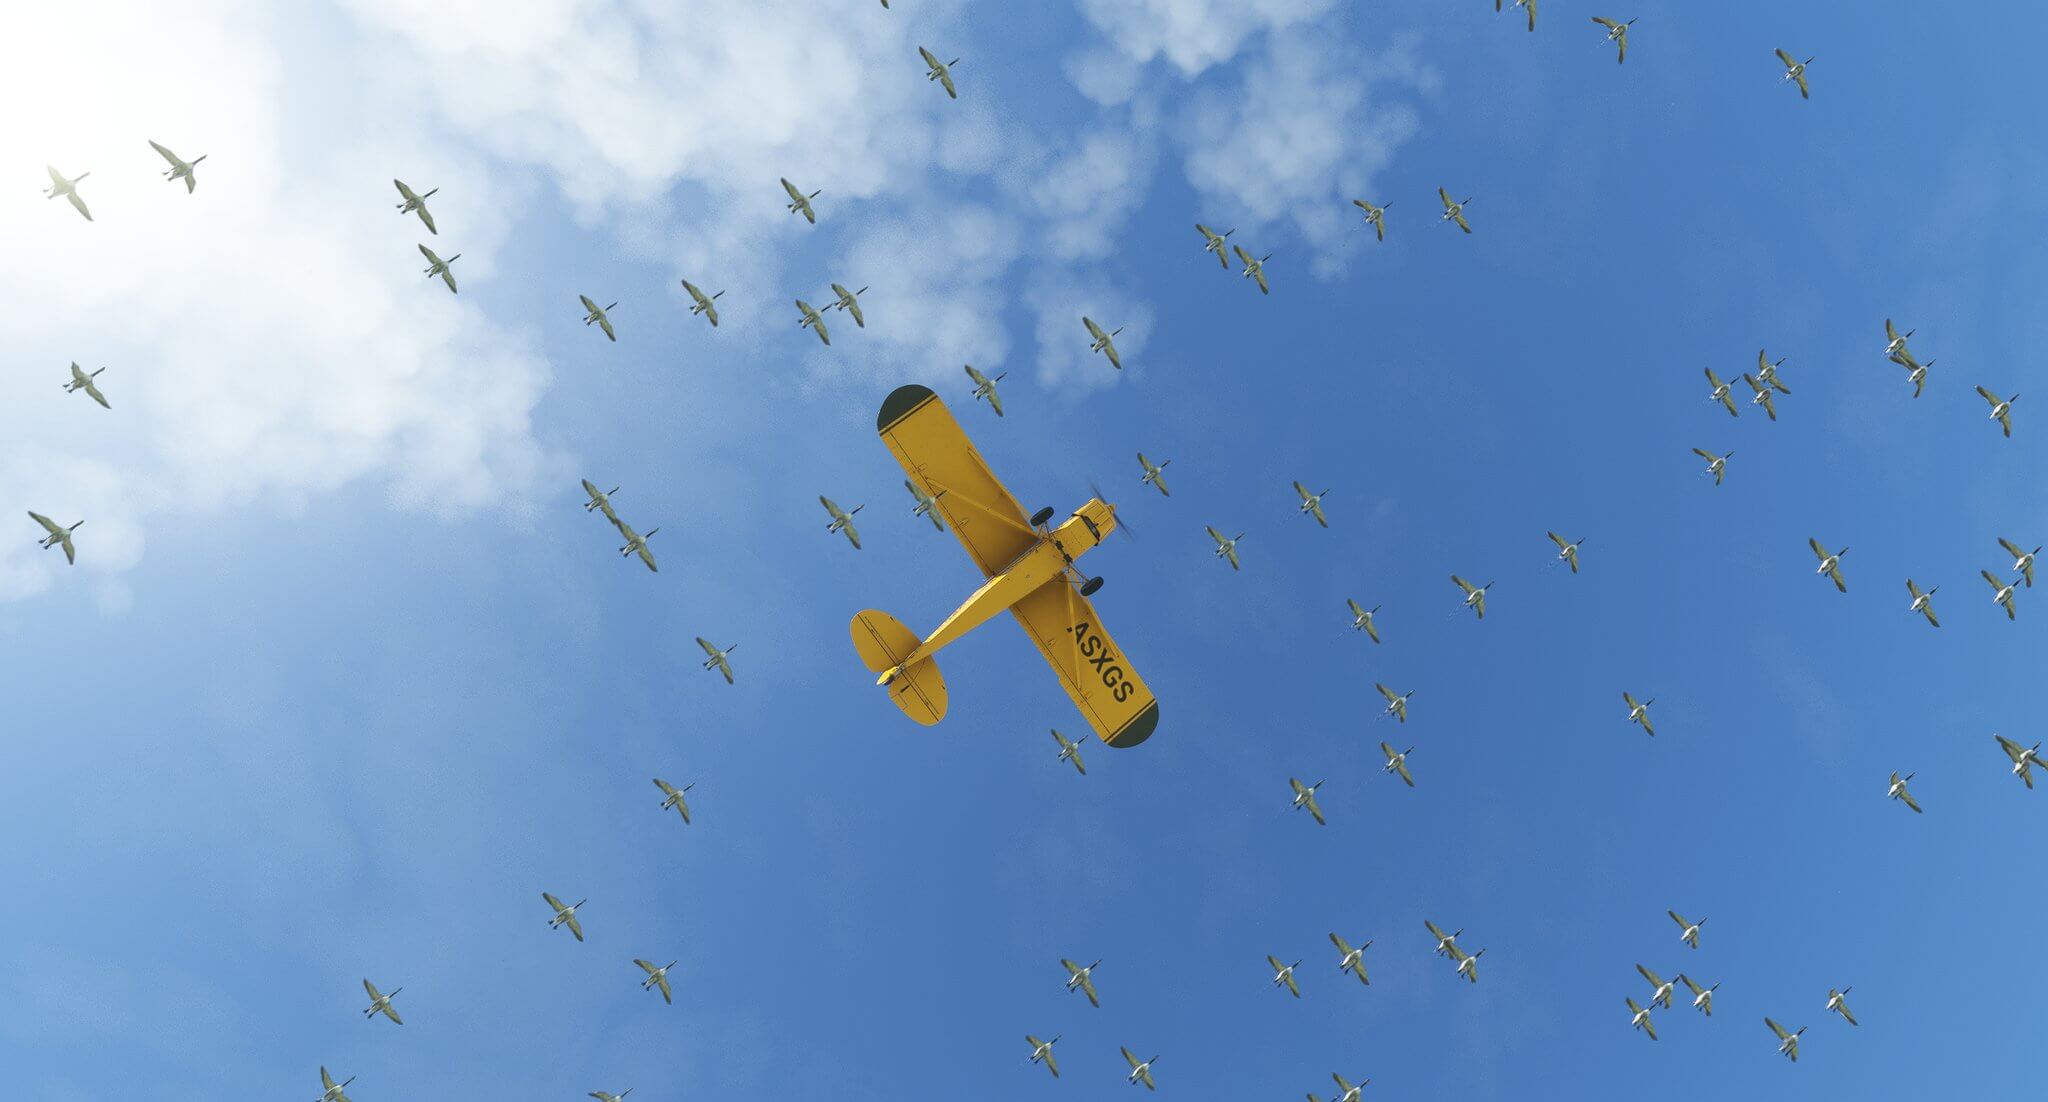 Bottom-up view of a Savage Cub flying with dozens of geese against a backdrop of a blue sky.